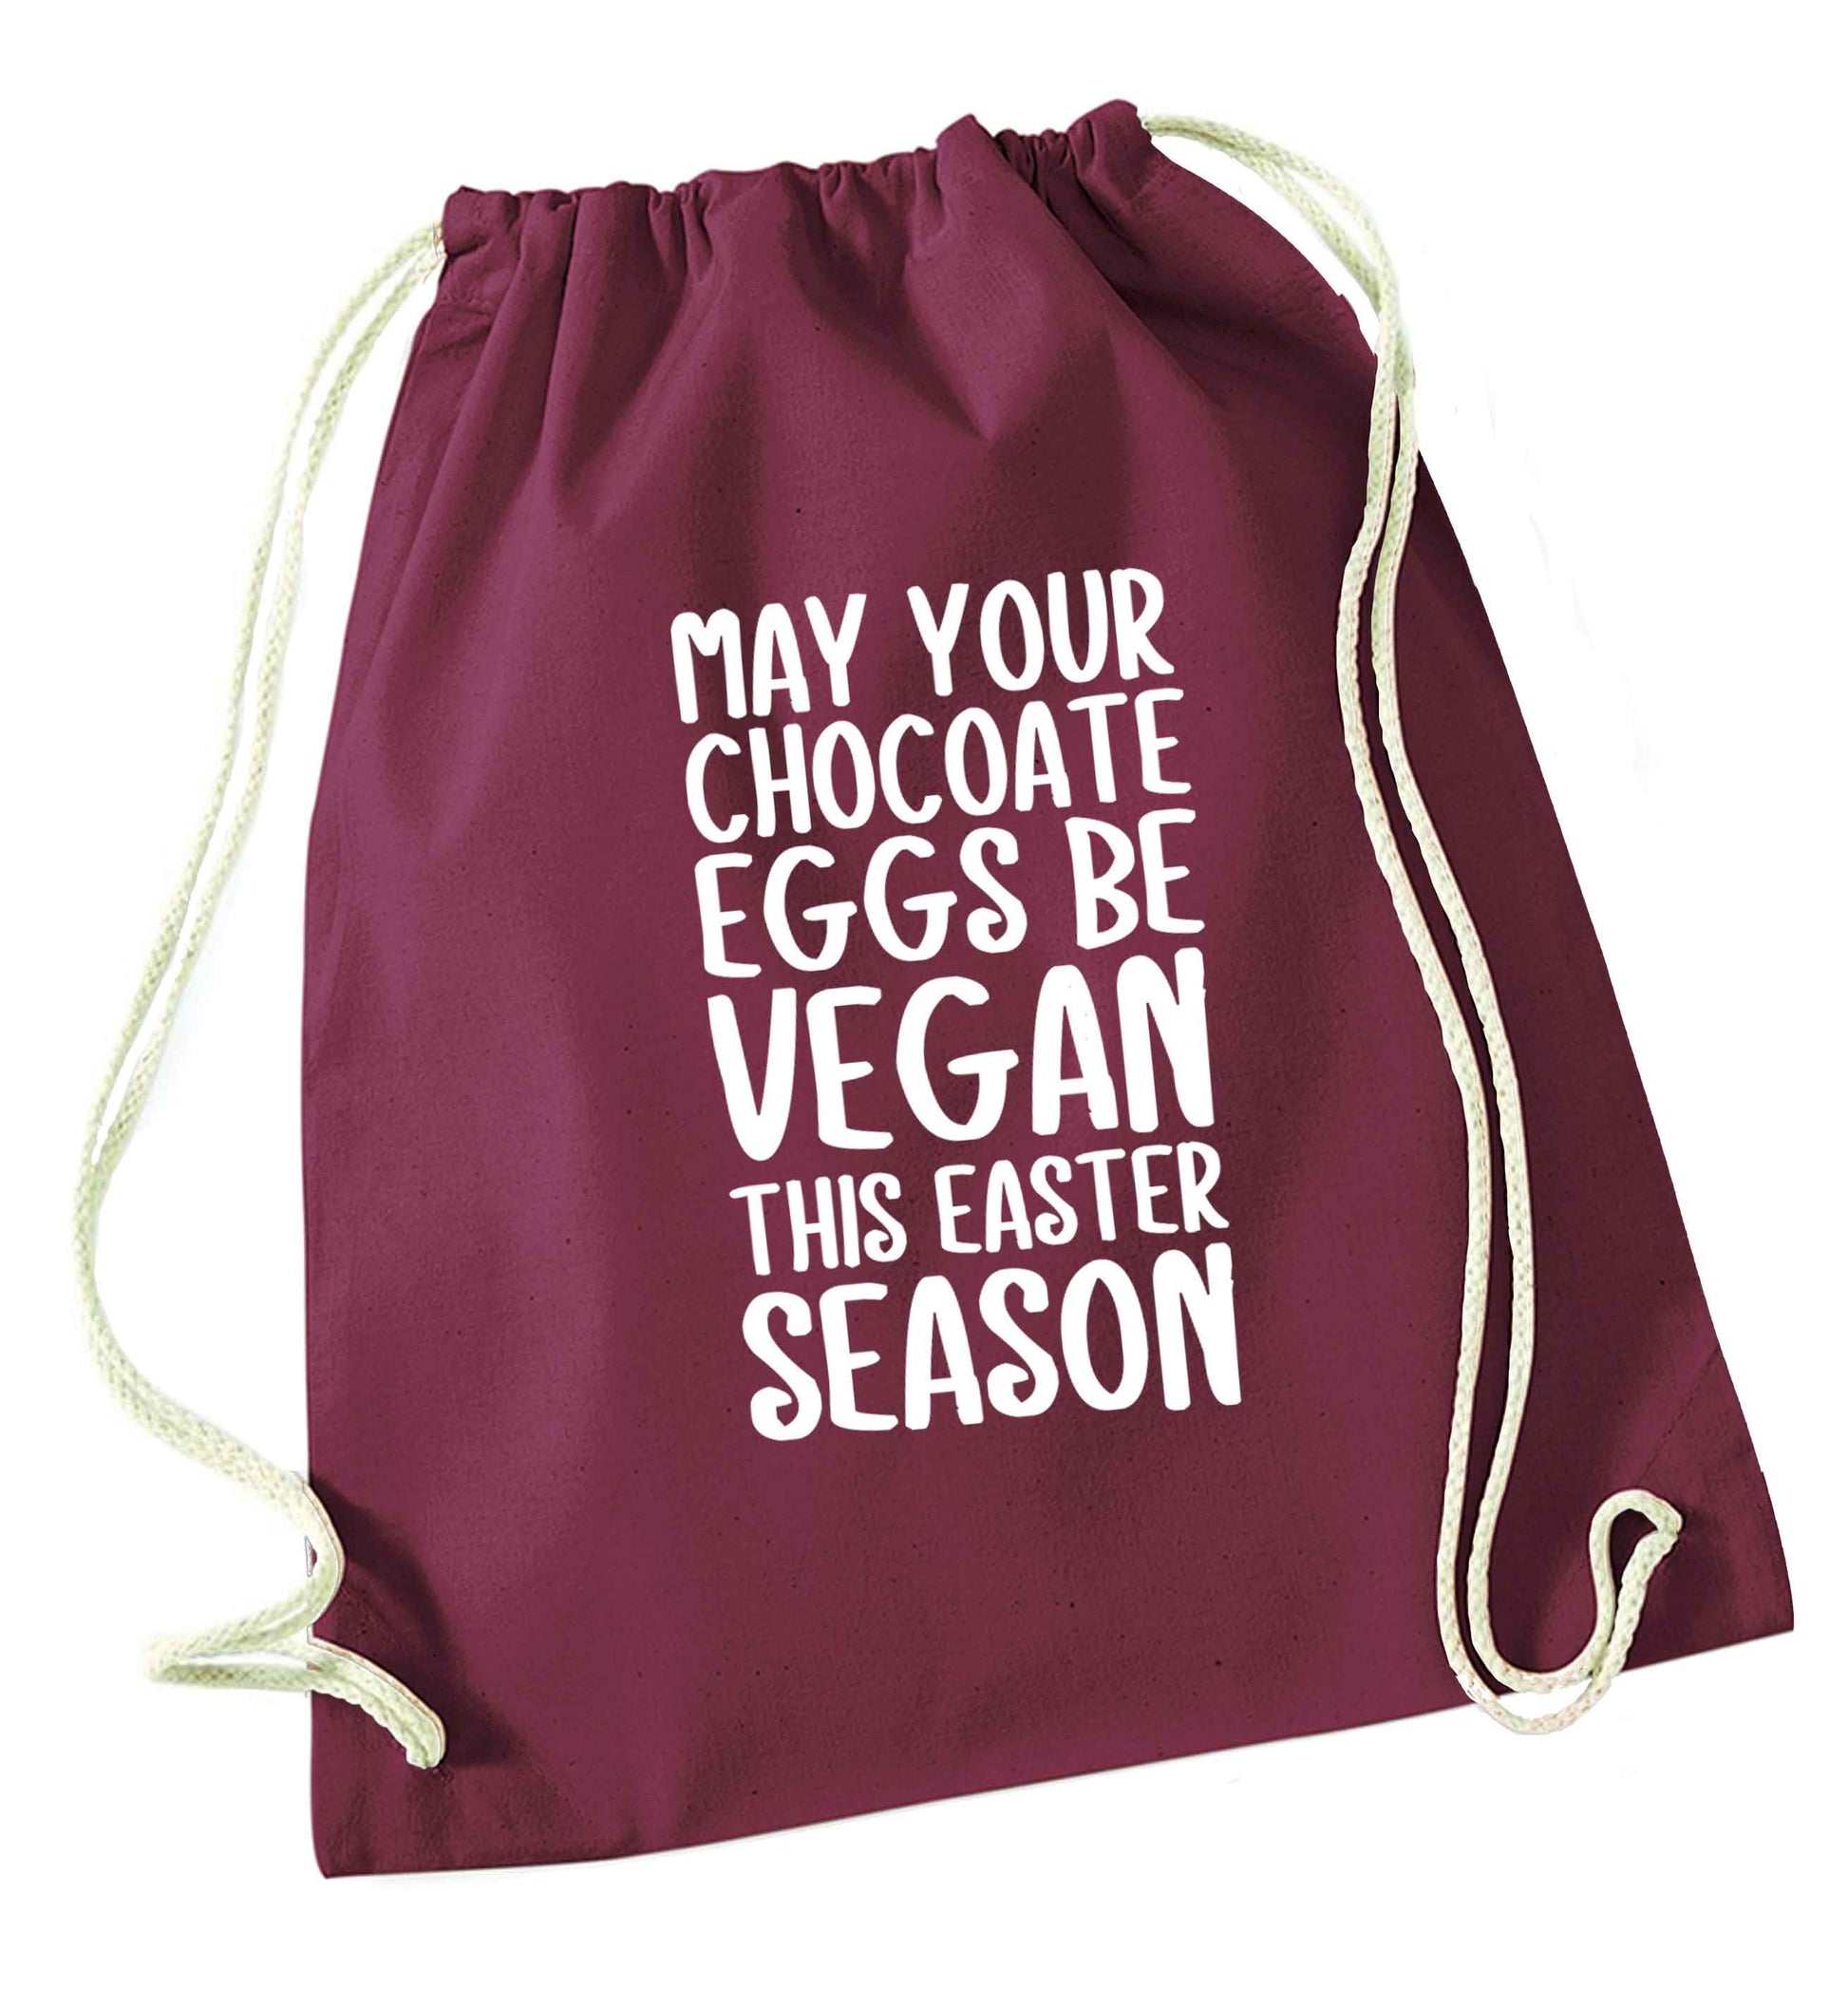 Easter bunny approved! Vegans will love this easter themed maroon drawstring bag